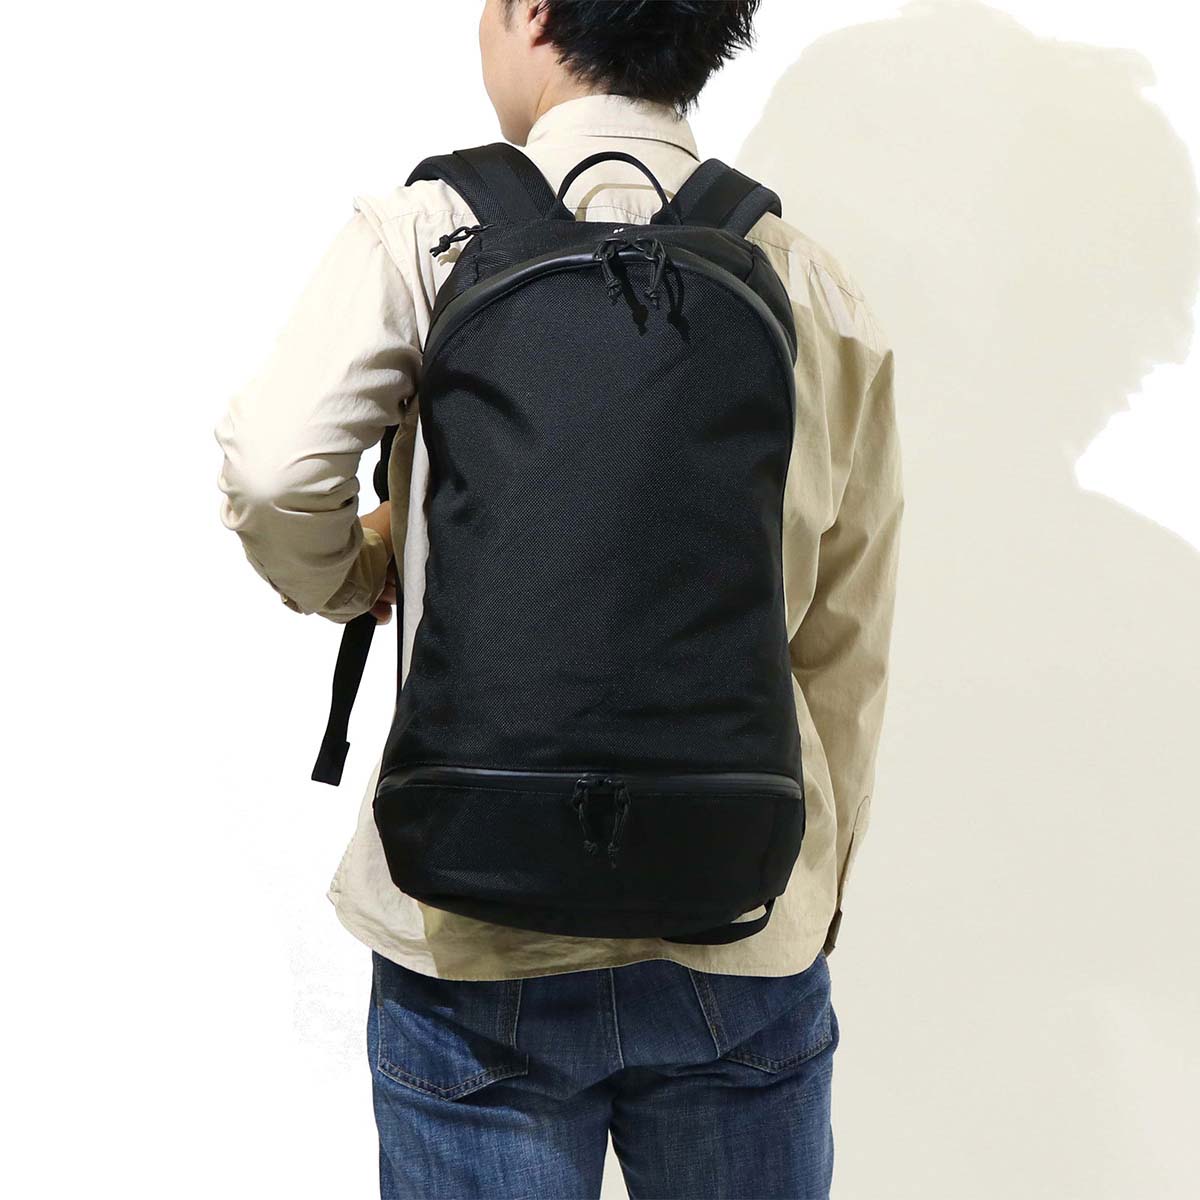 Terg BY HELINOX DAY PACK リュック バックパック